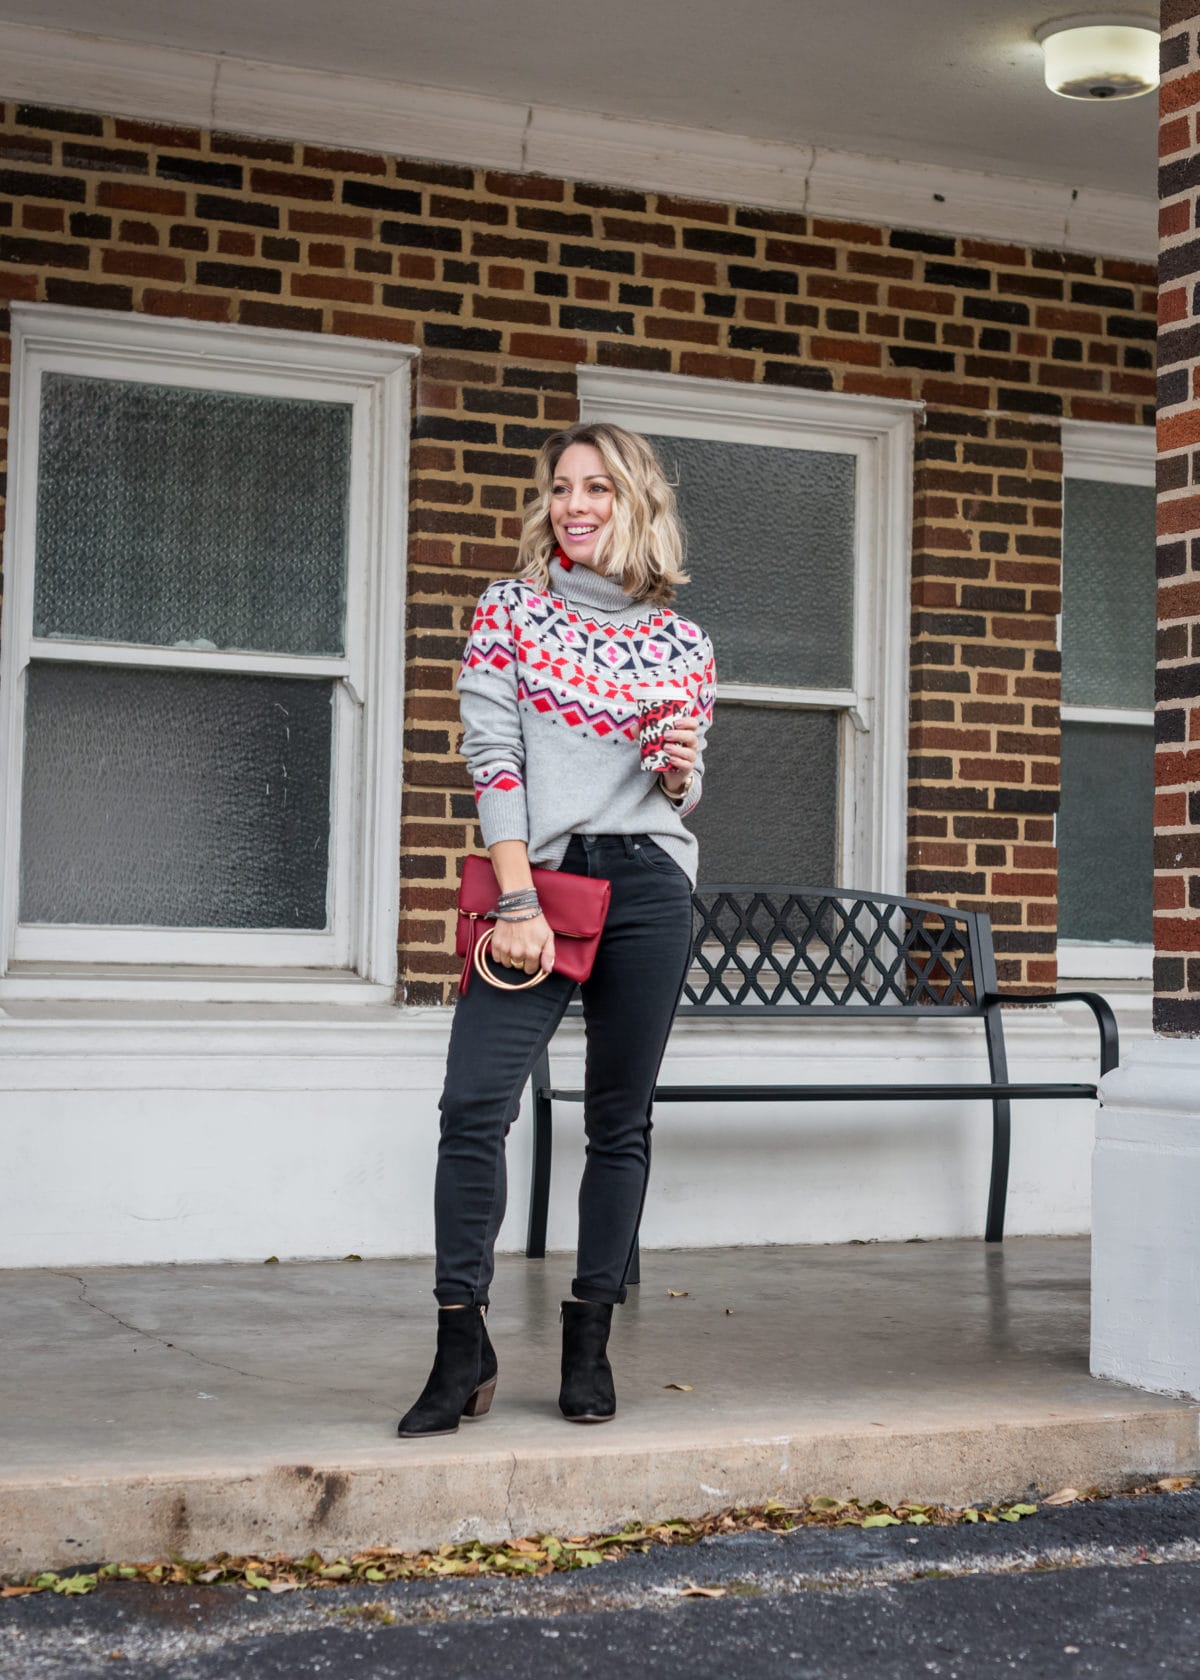 Winter outfit - fair isle sweater and jeans